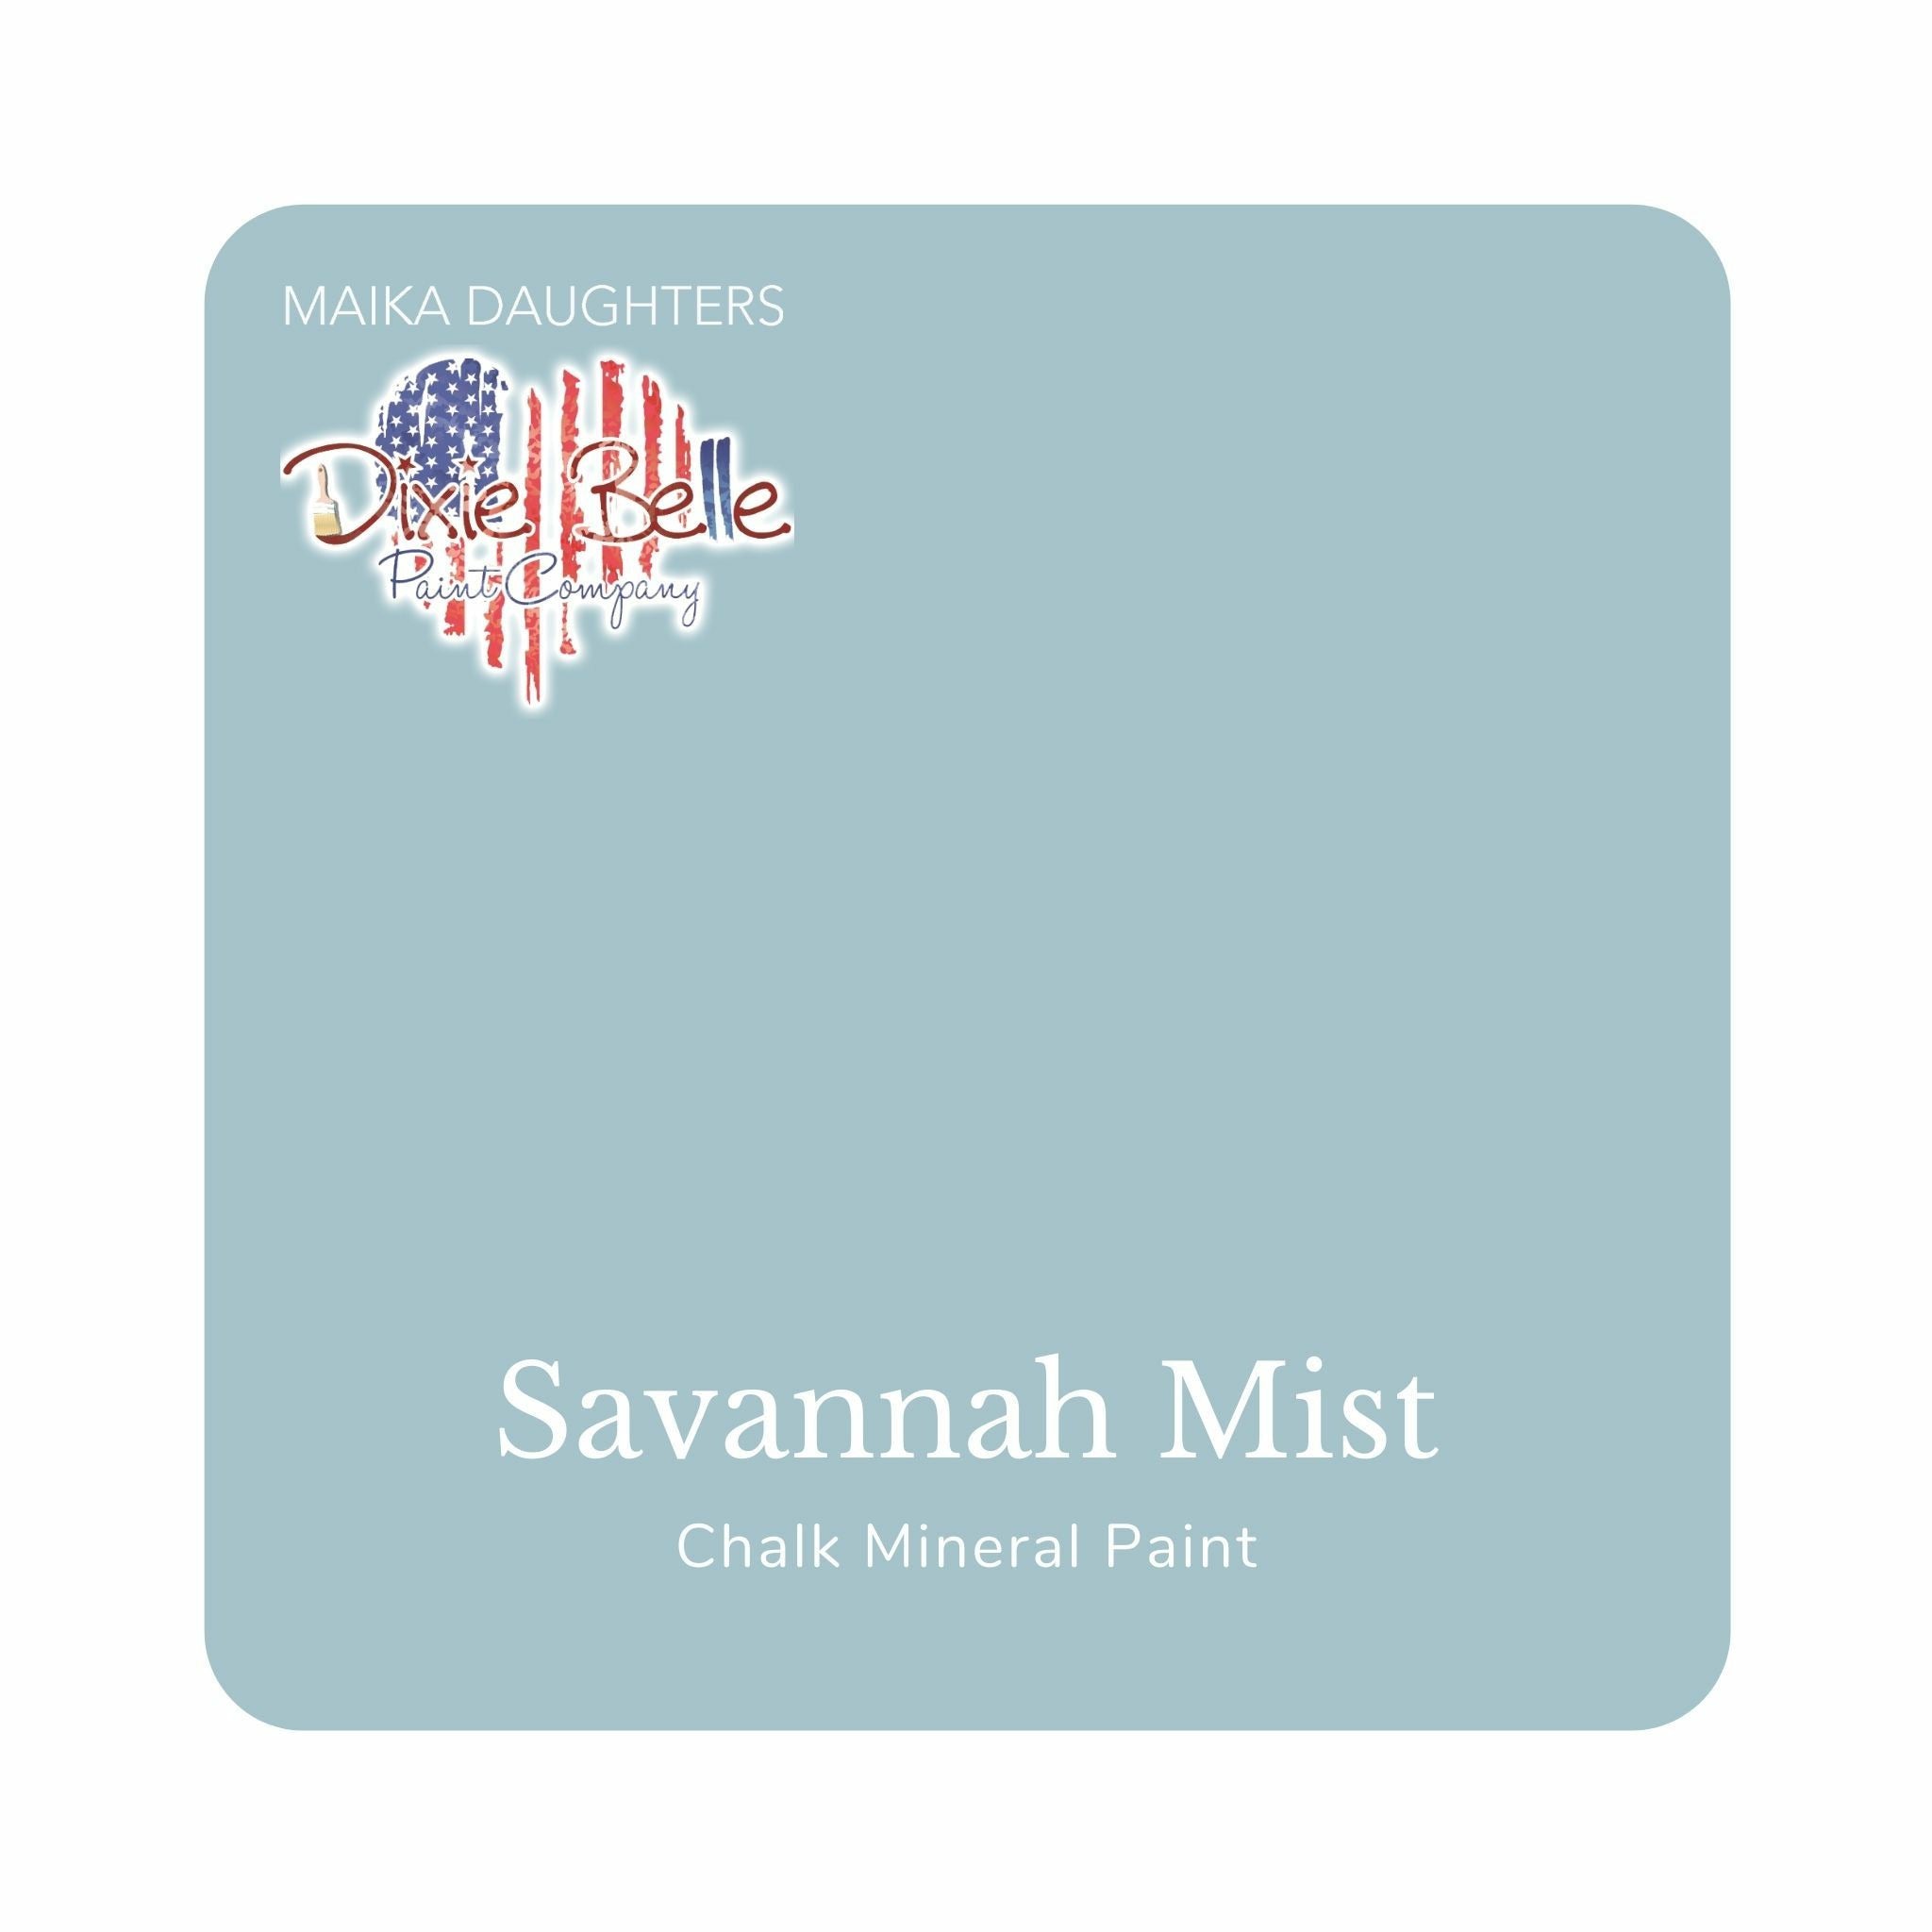 A square swatch card of Dixie Belle Paint Company’s Savannah Mist Chalk Mineral Paint is against a white background. This color is a light grey blue.